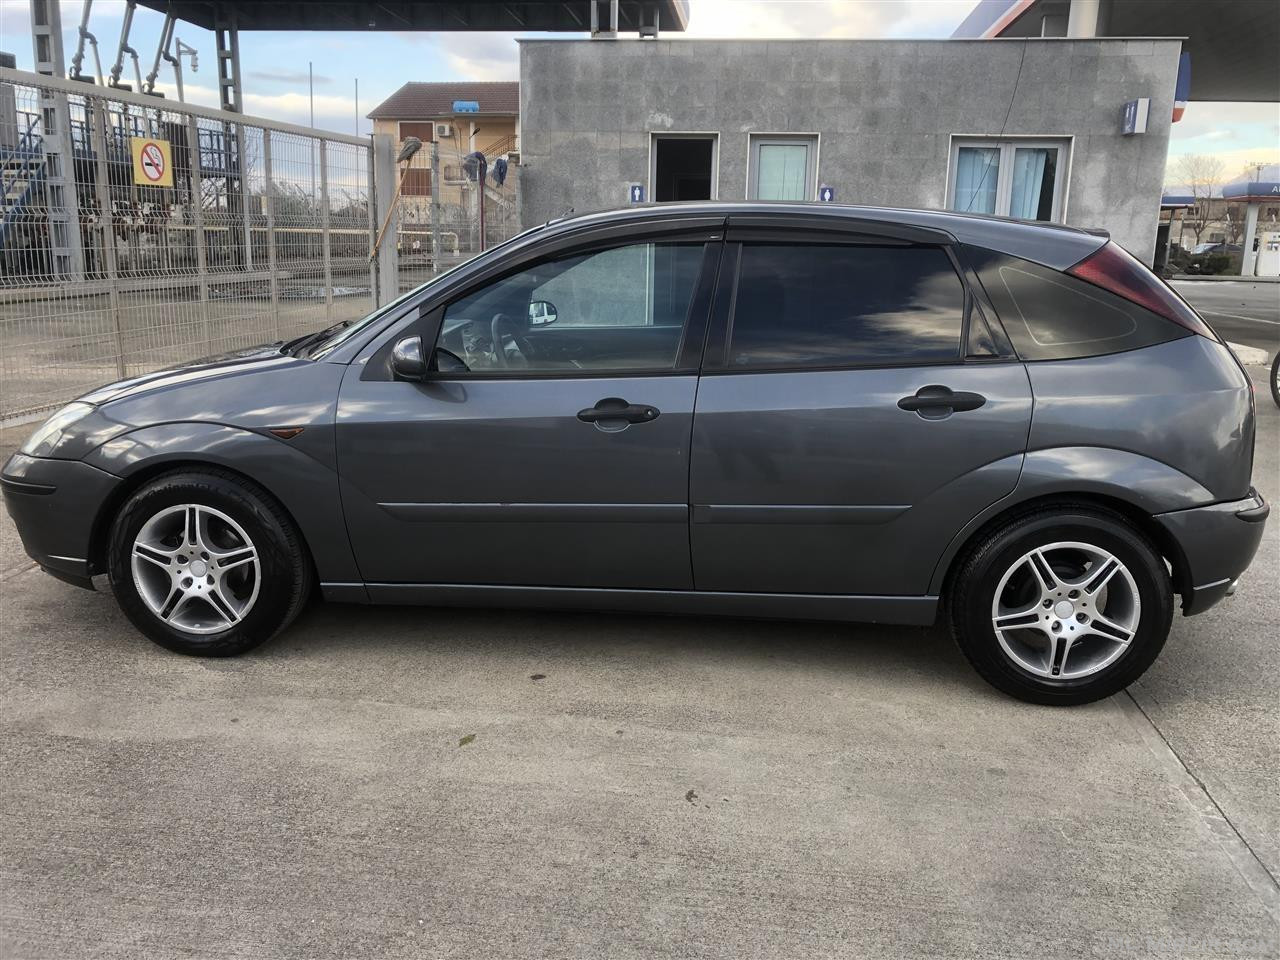 Ford Focus 2002 1.8 Nafte